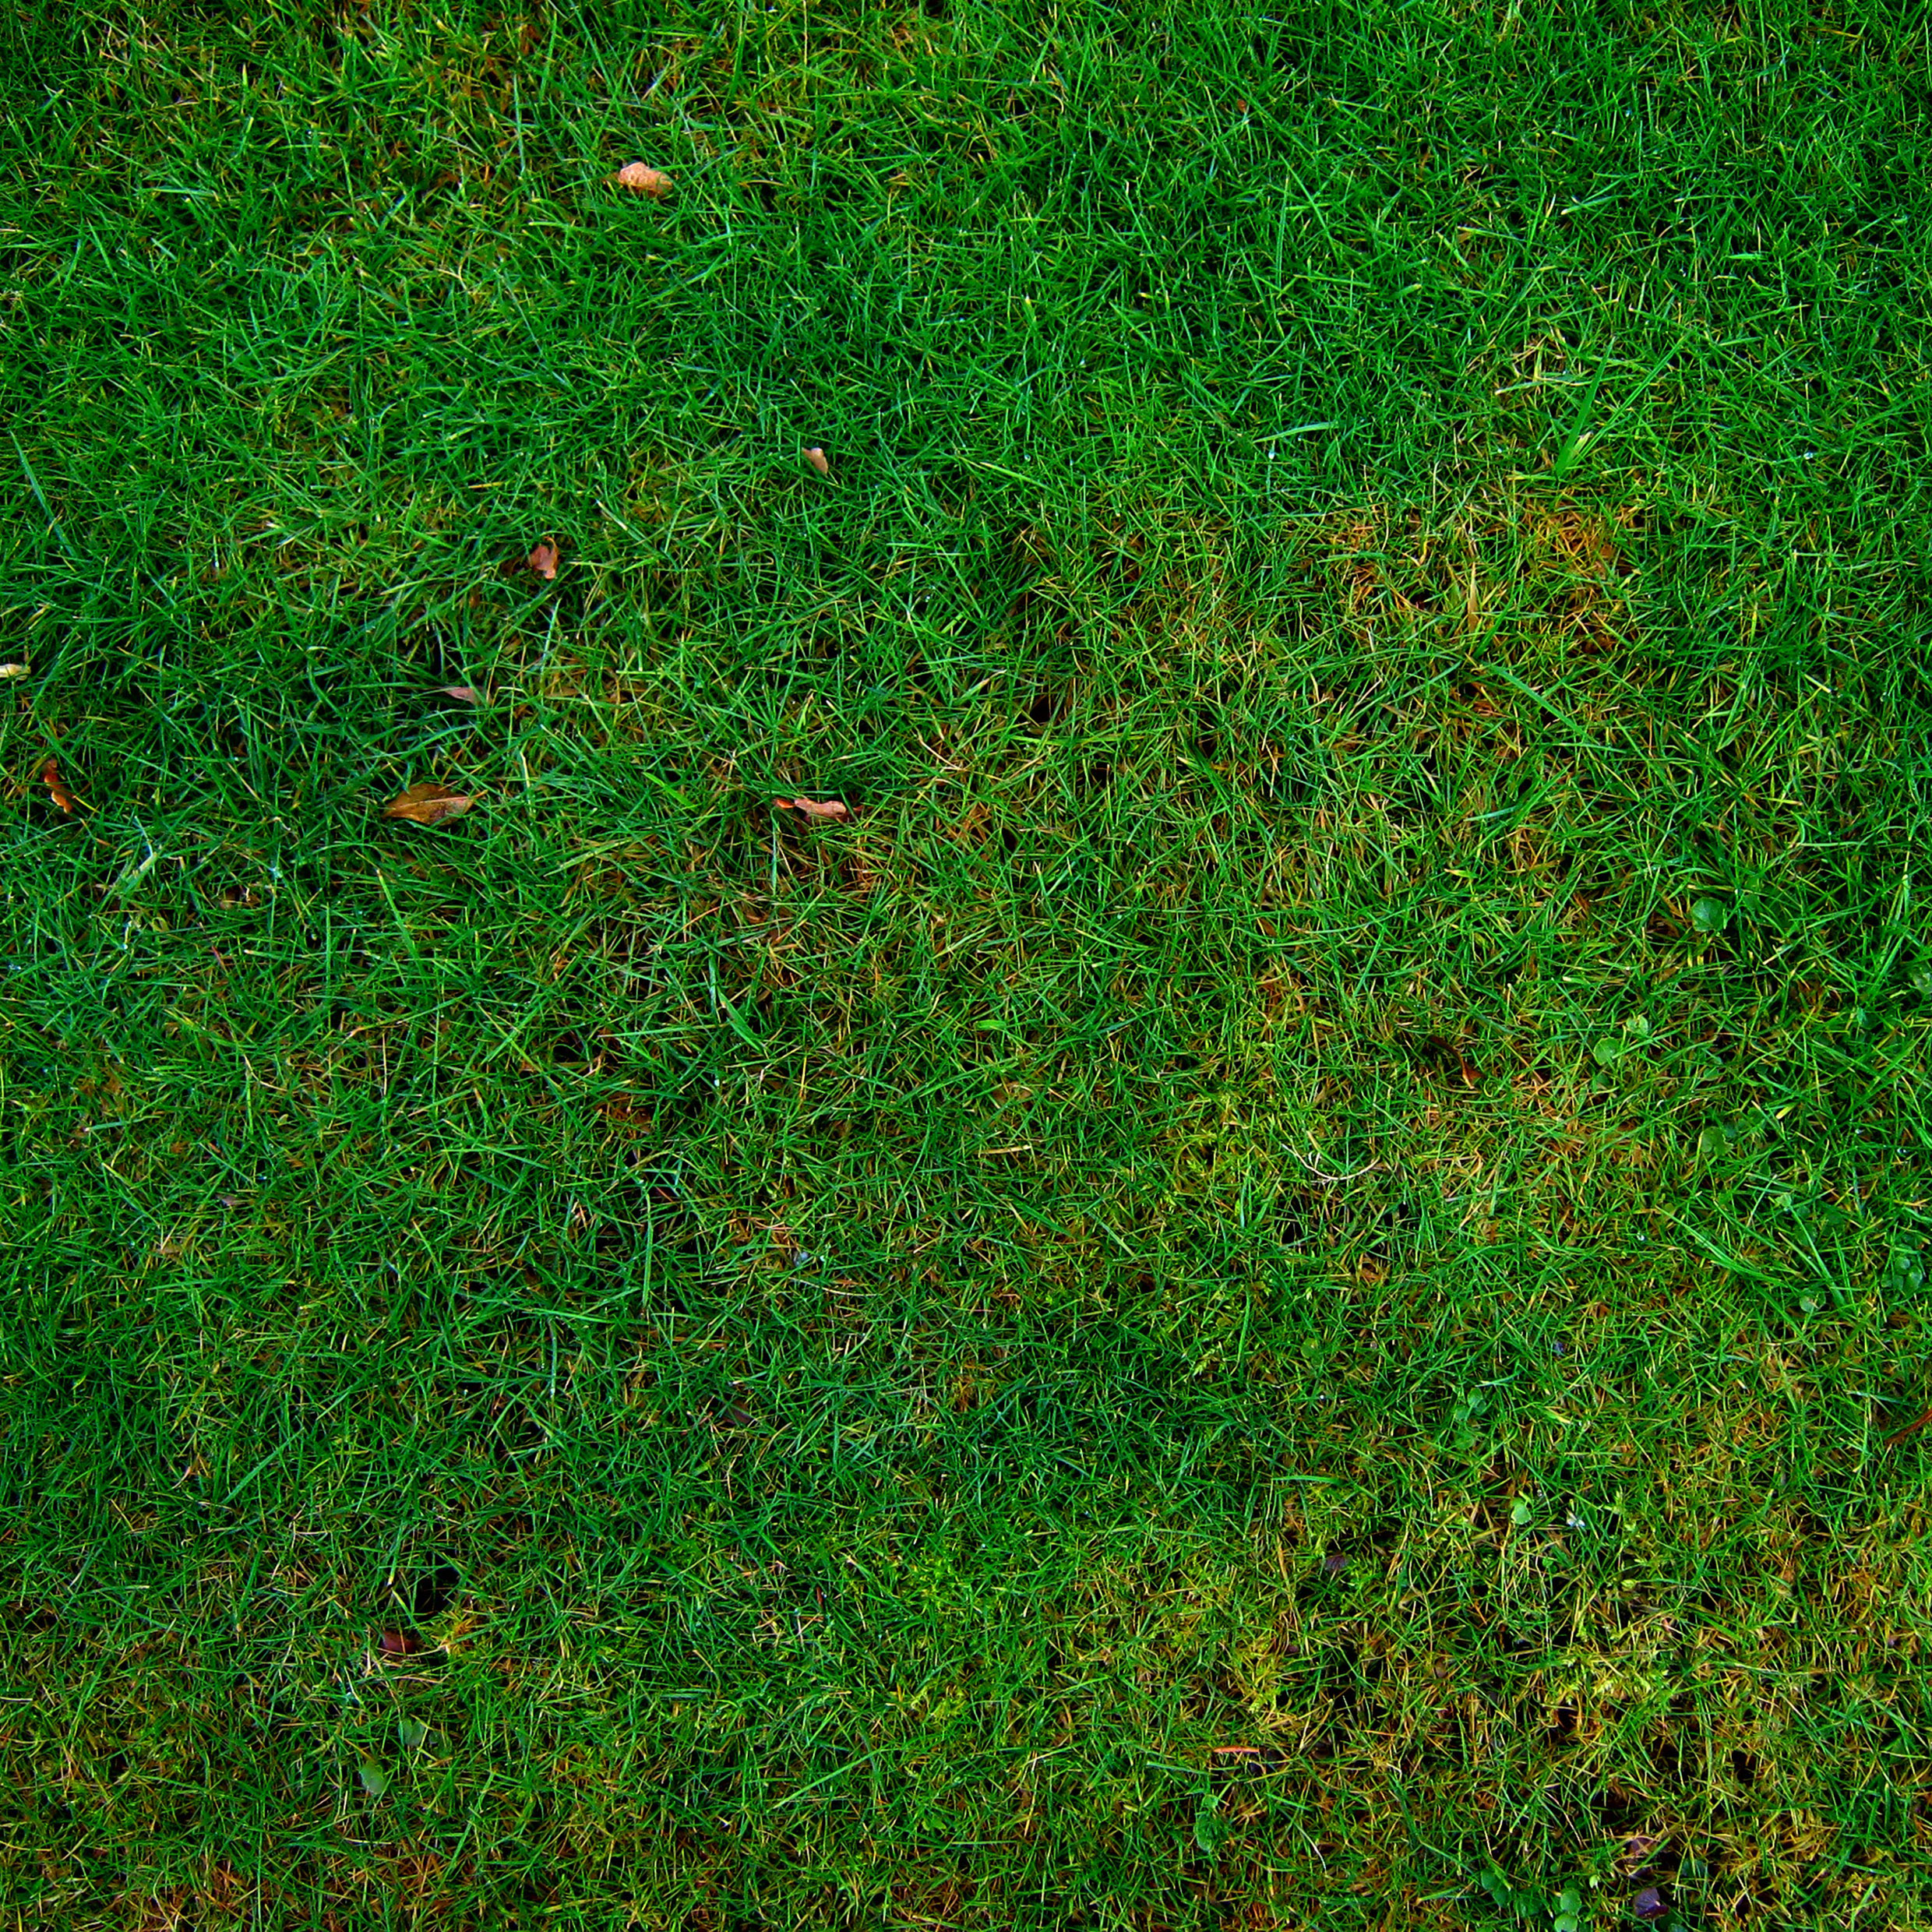 Seven Grass Textures Or Lawn Background Image